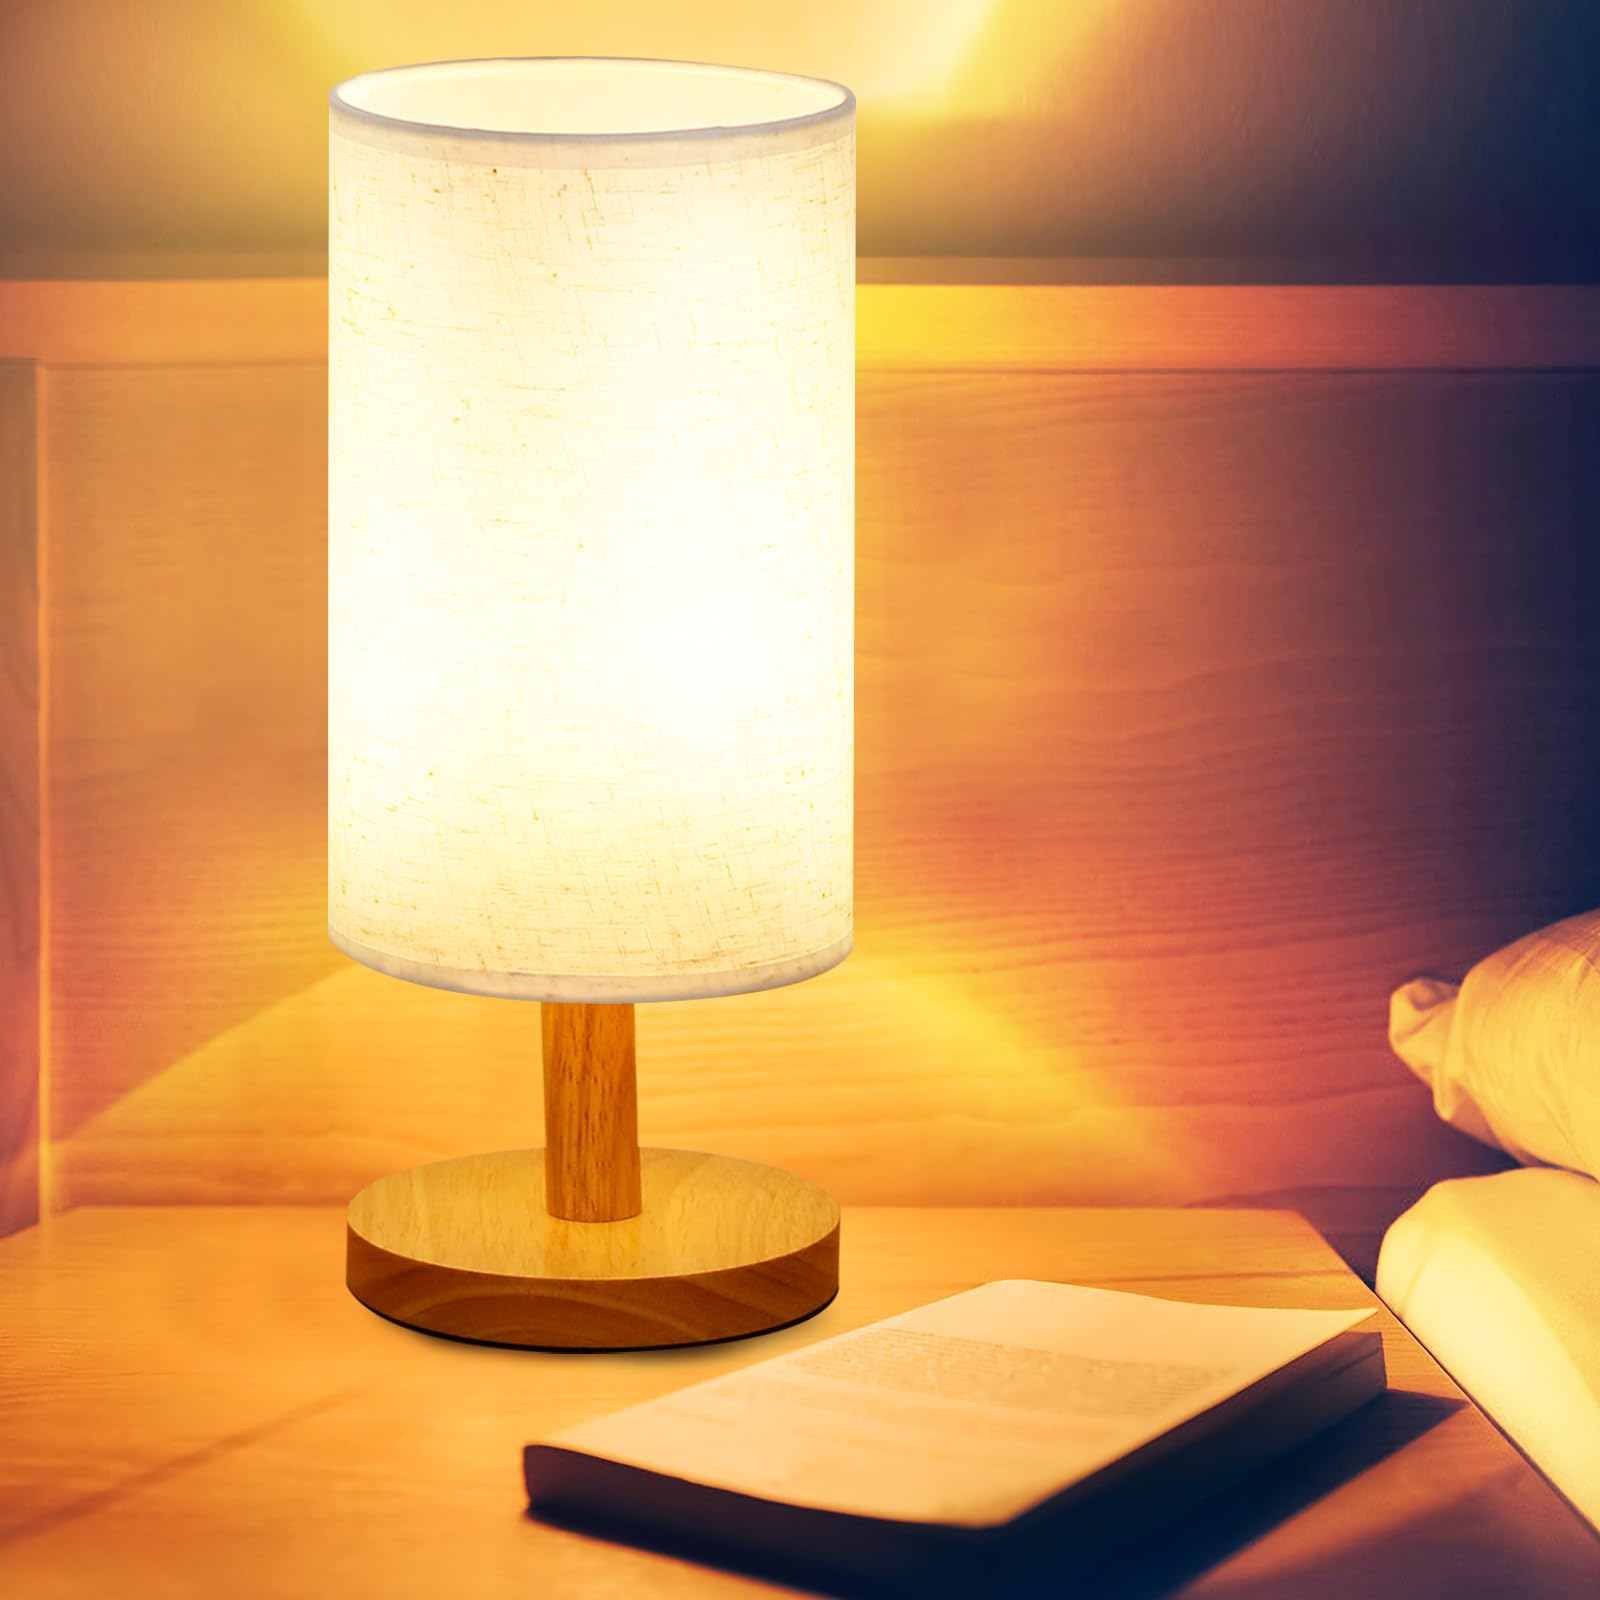 AFROG Table Lamp for Bedroom - 3 Way Dimmable Nightstand Lamp with Round Flaxen Fabric Shade for Living Room Kids Room Office Dorm,Solid Wood,12W, LED Bulb Included